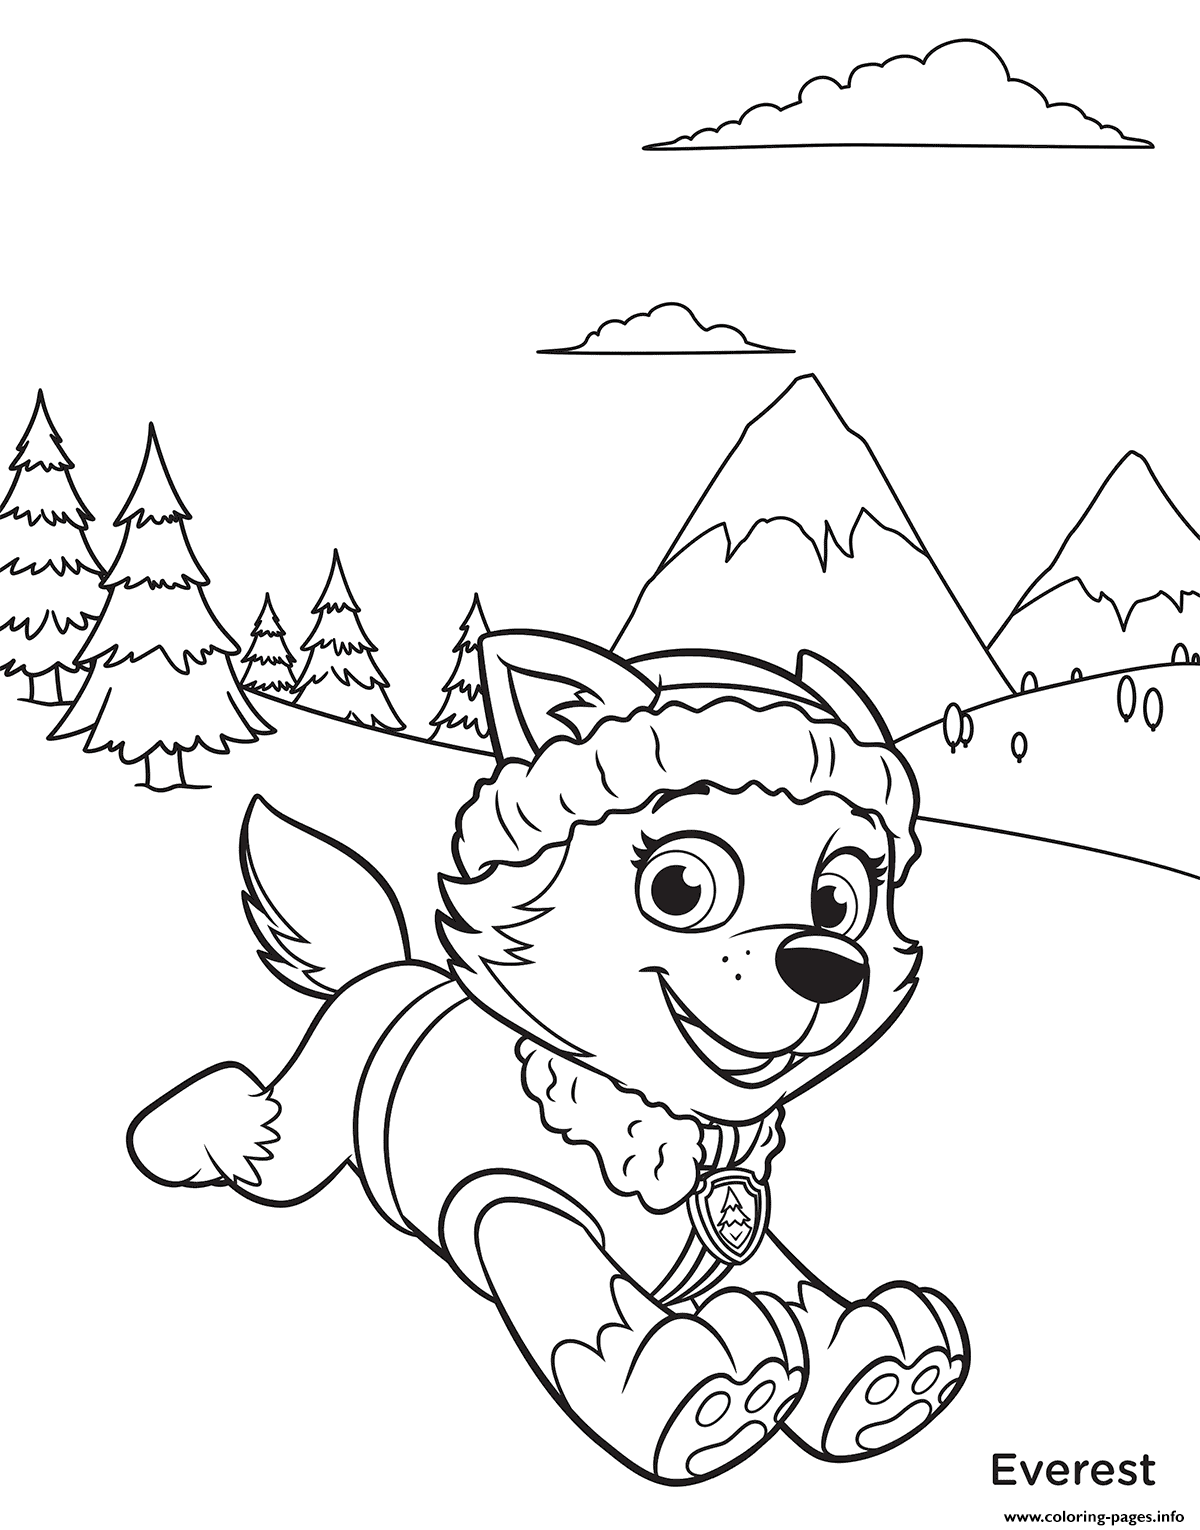 Printable Image Of Everest From Paw Patrol